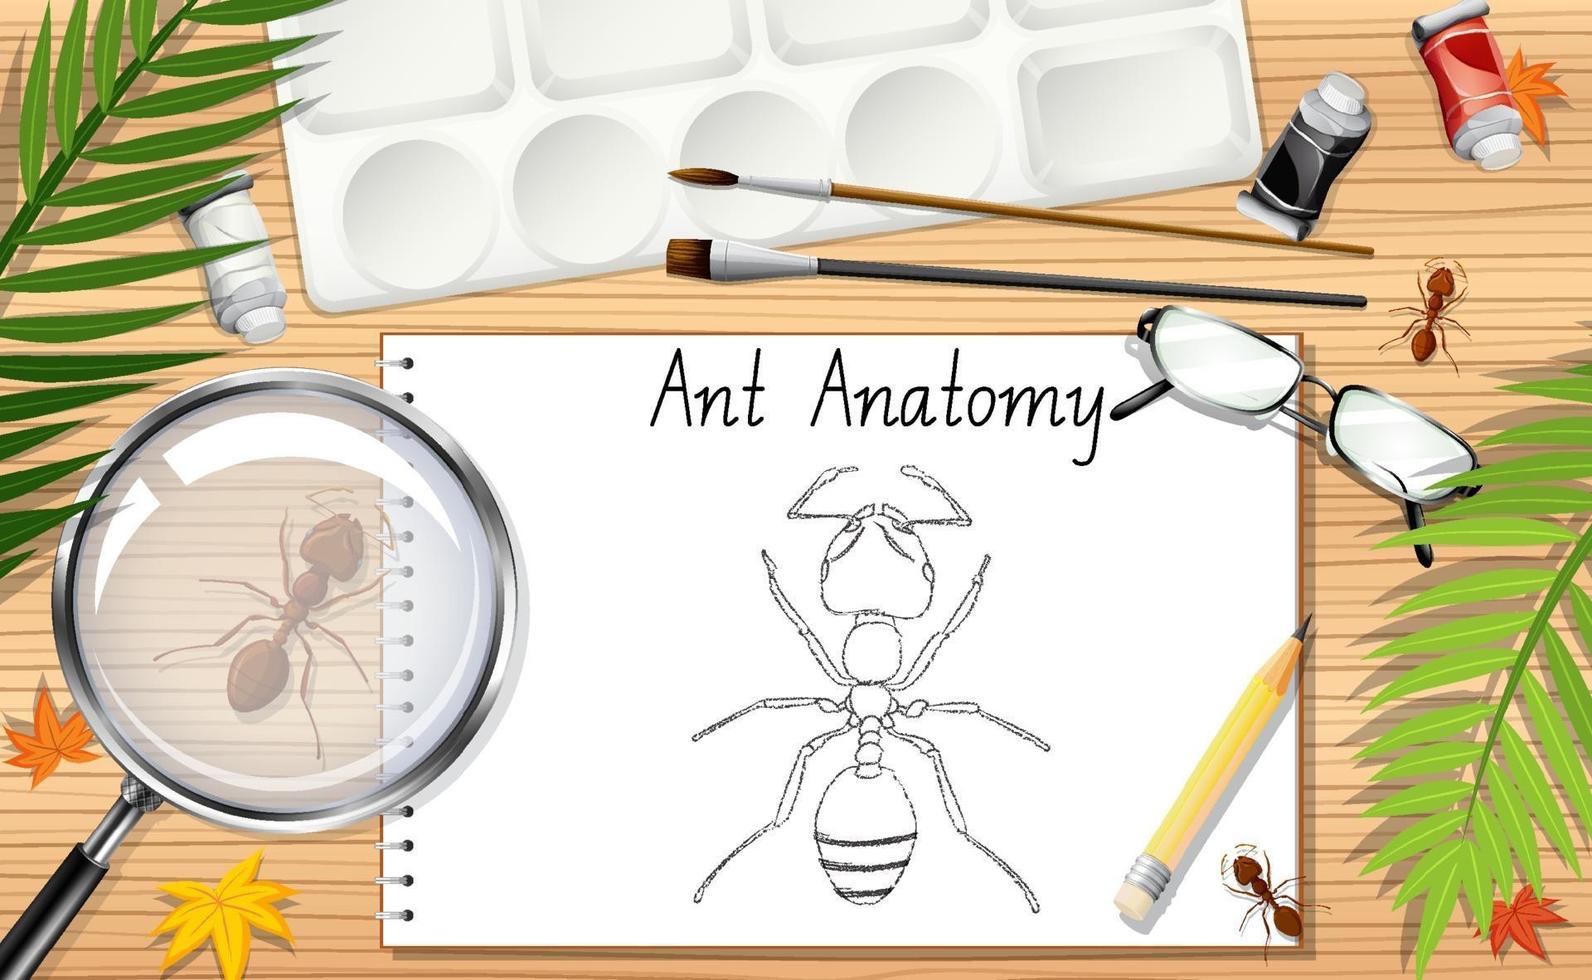 A doodle drawing of ant anatomy vector